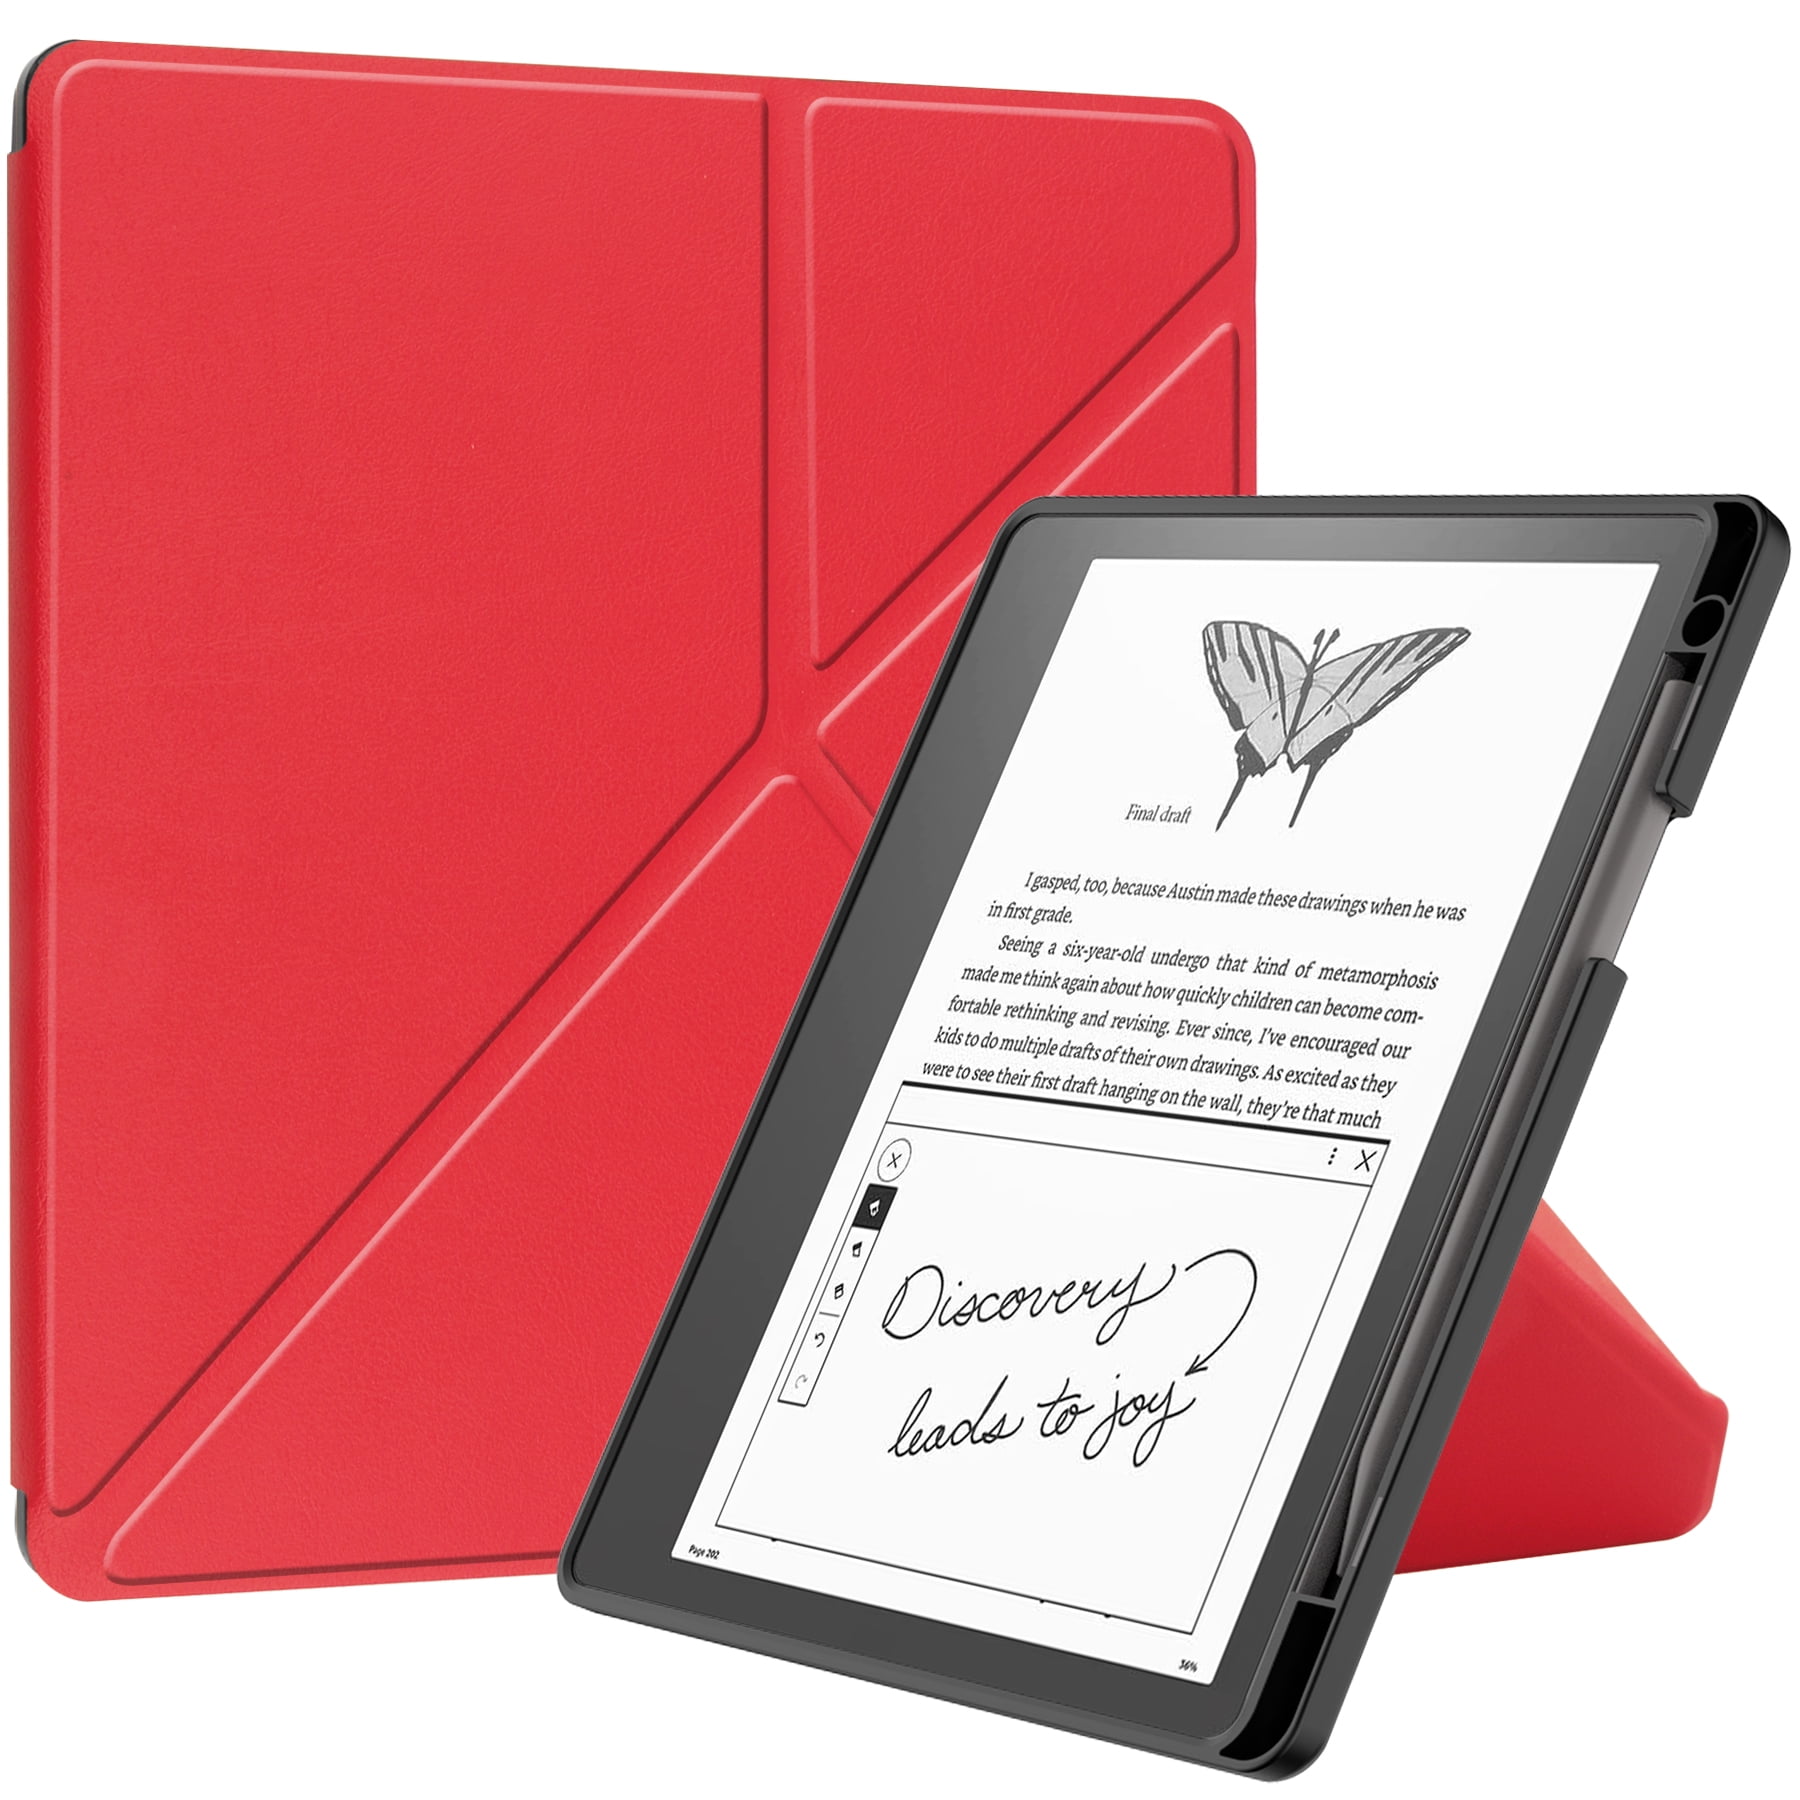 For Kobo Sage 8 E-reader Released 2021, Soft Tpu Matte Back Cover, Slim  Smart Folio Cover With Magnetic Closure And Stand - Red